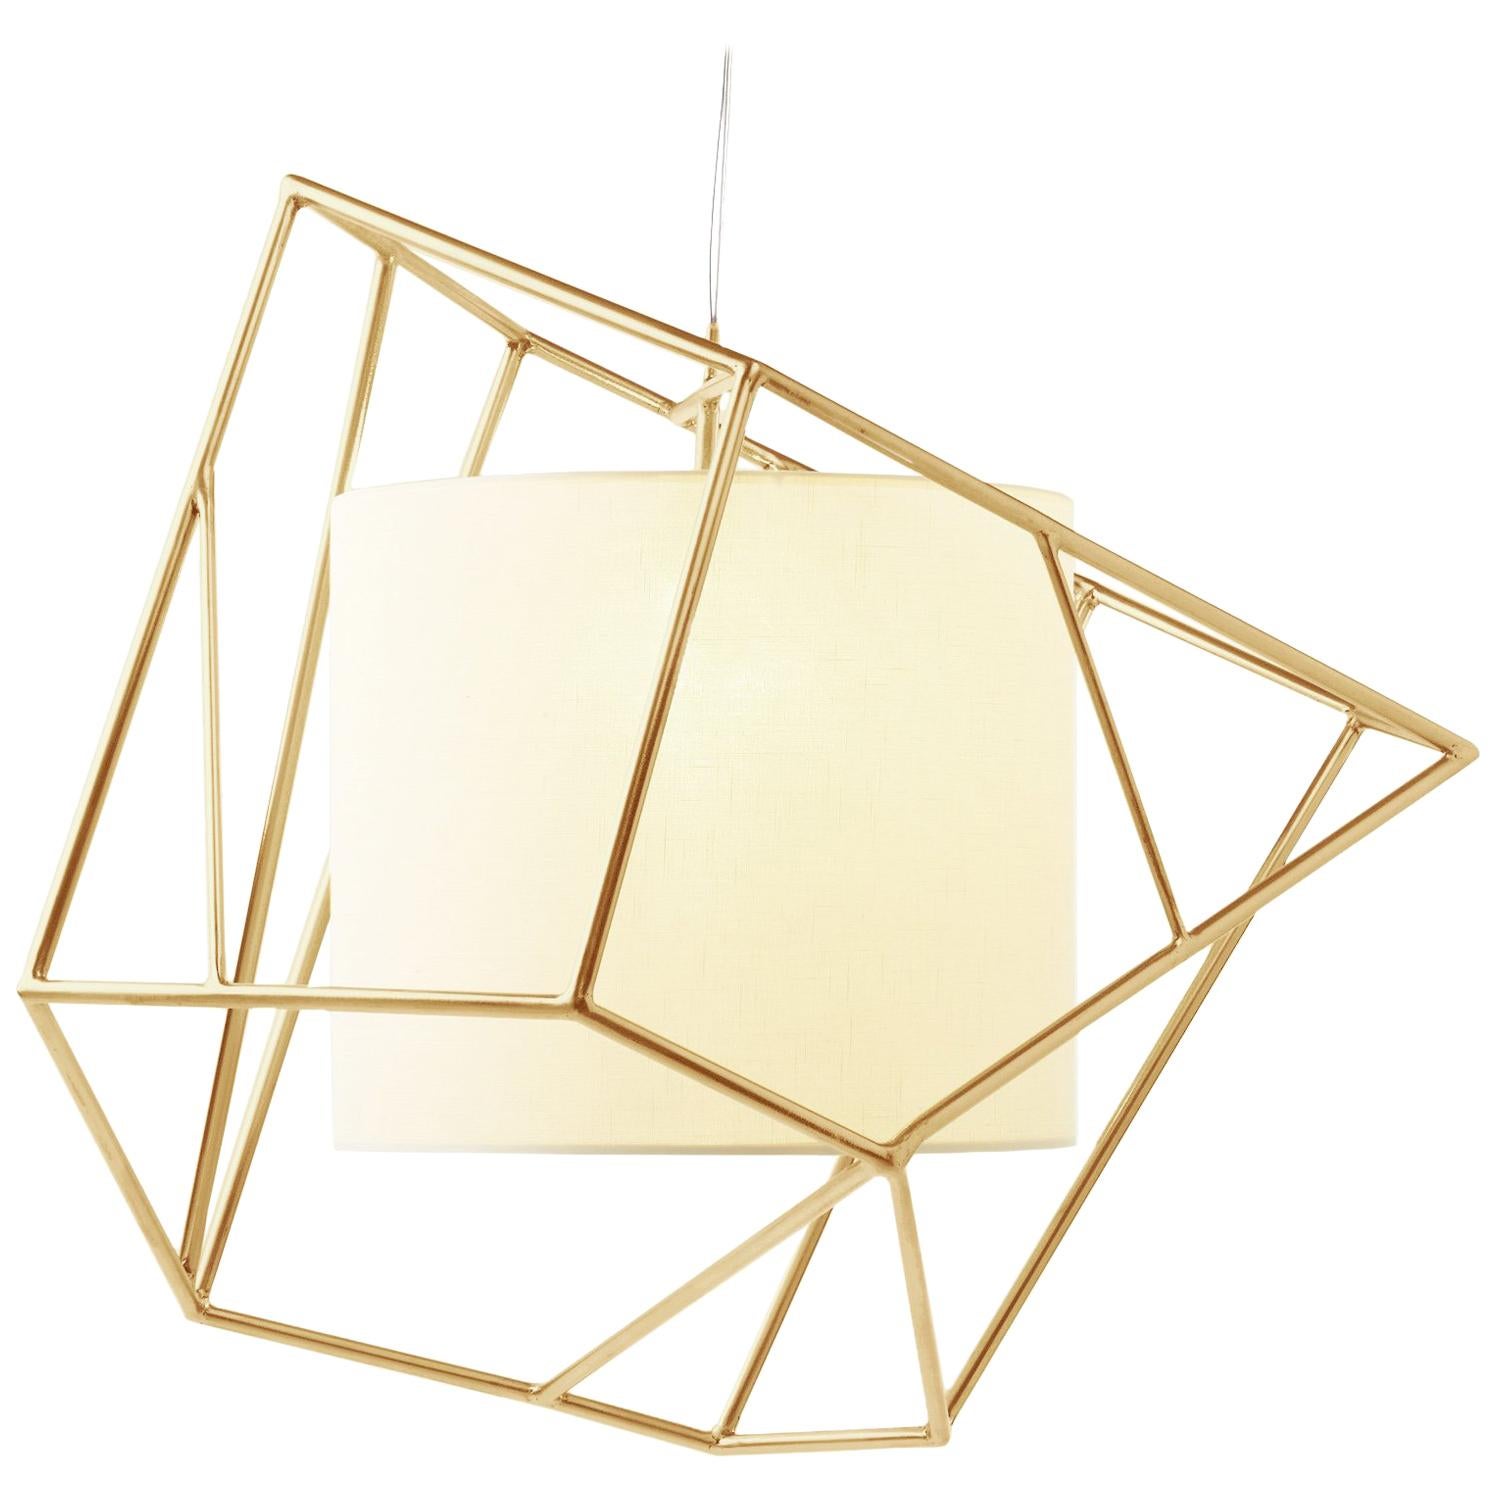 Art Deco Inspired Star I Pendant Lamp Polished Brass with Linen Shade